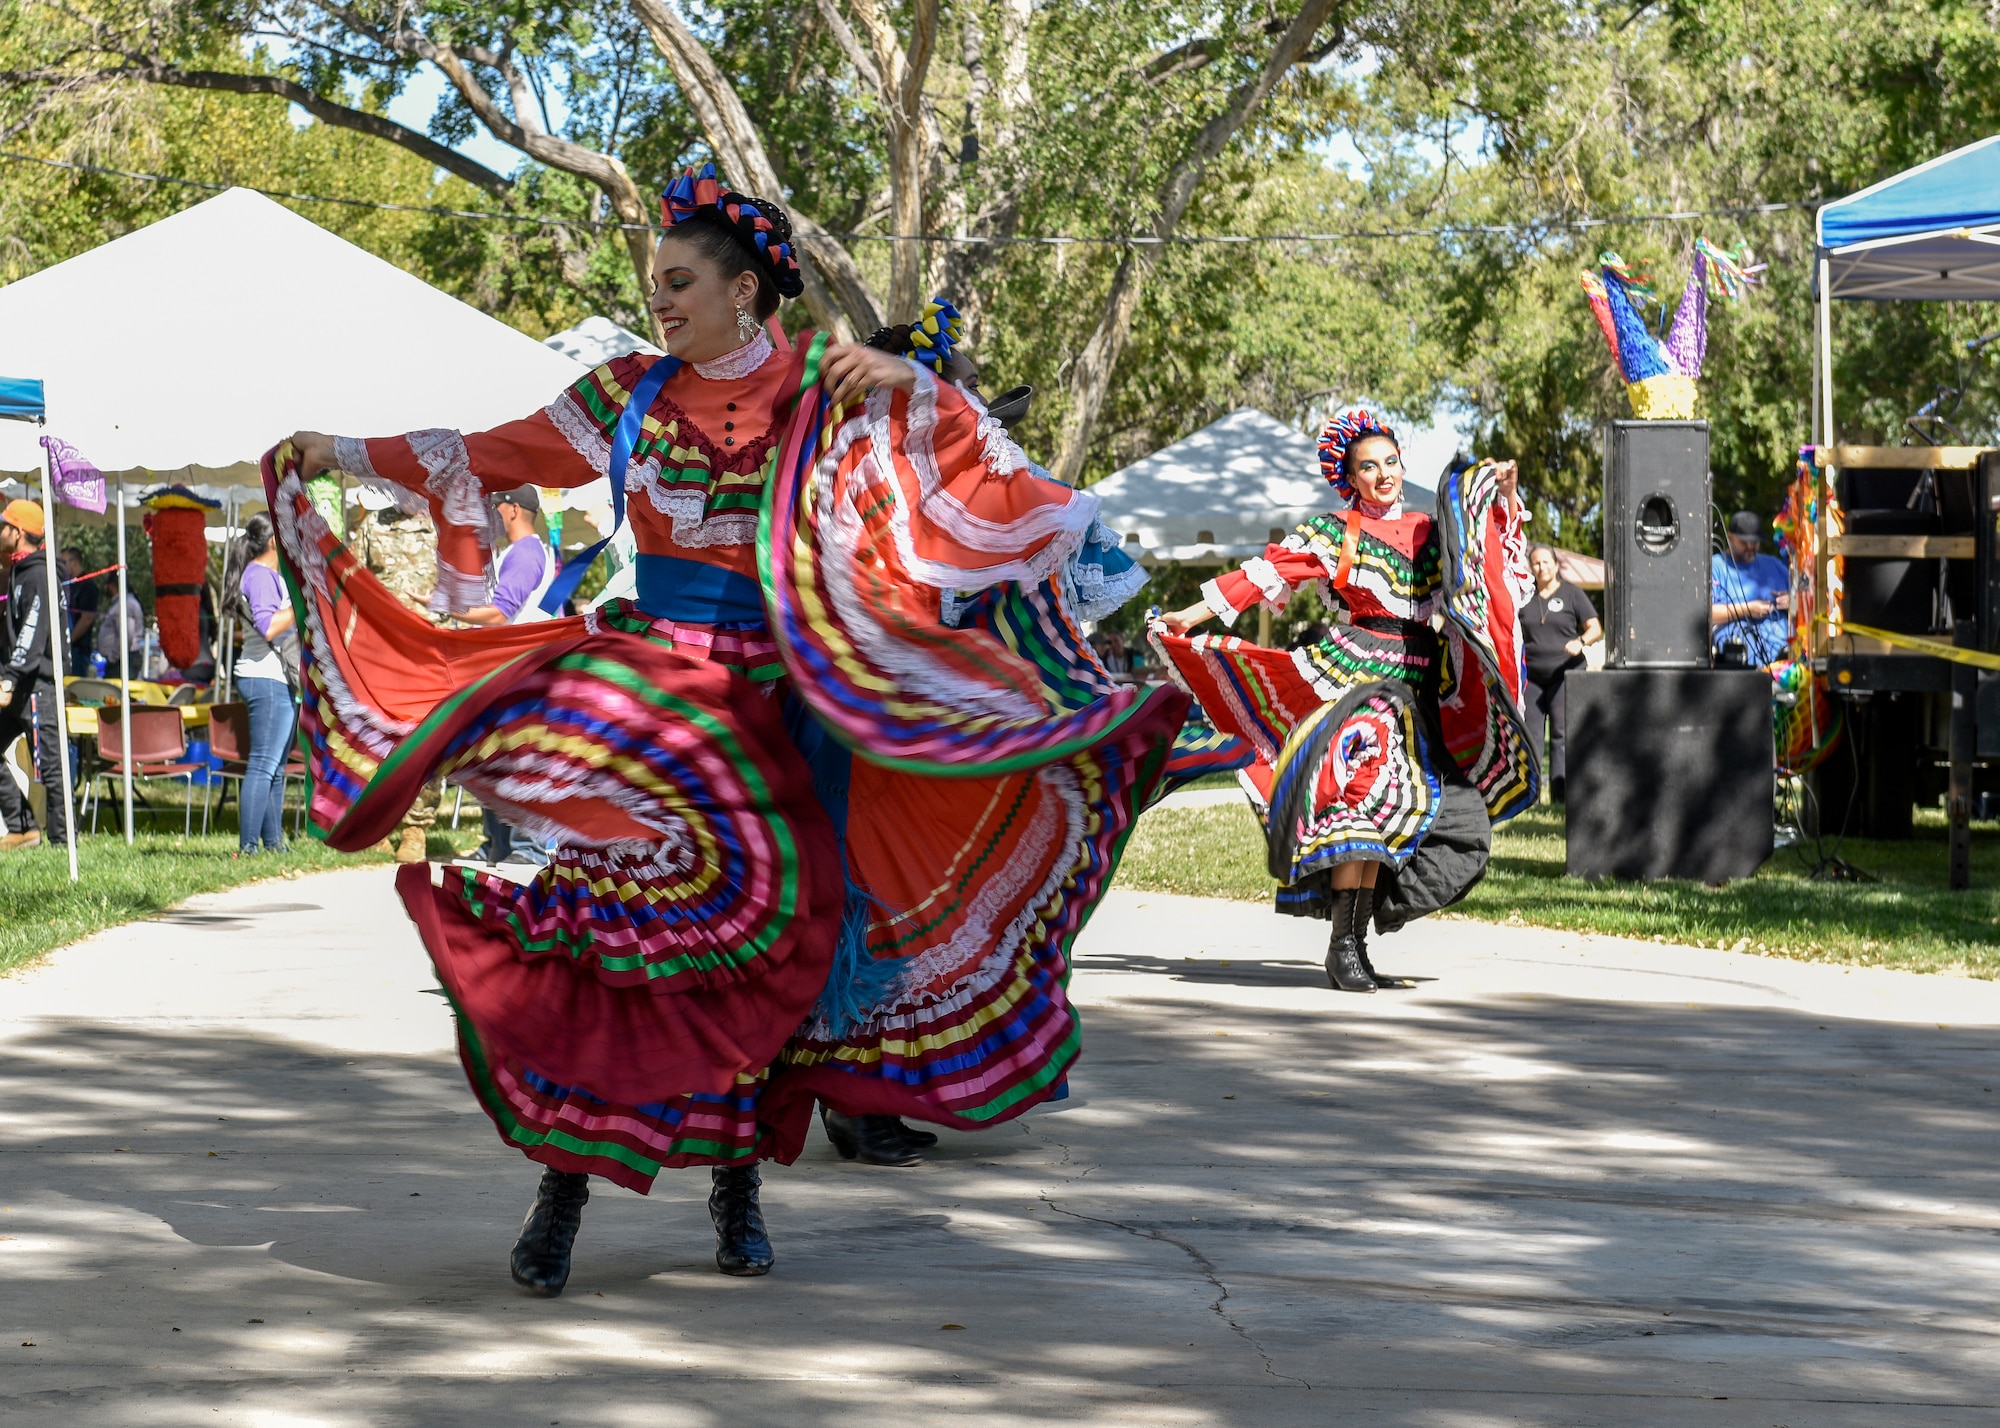 Dancers at the Hispanic Heritage Month festival perform a folkloric dance at Kirtland Air Force Base, N.M., Oct. 3, 2019. People belonging to the various units on base and mission partners of Kirtland AFB attended the festivities. (U.S. Air Force photo by Airman 1st Class Austin J. Prisbrey)